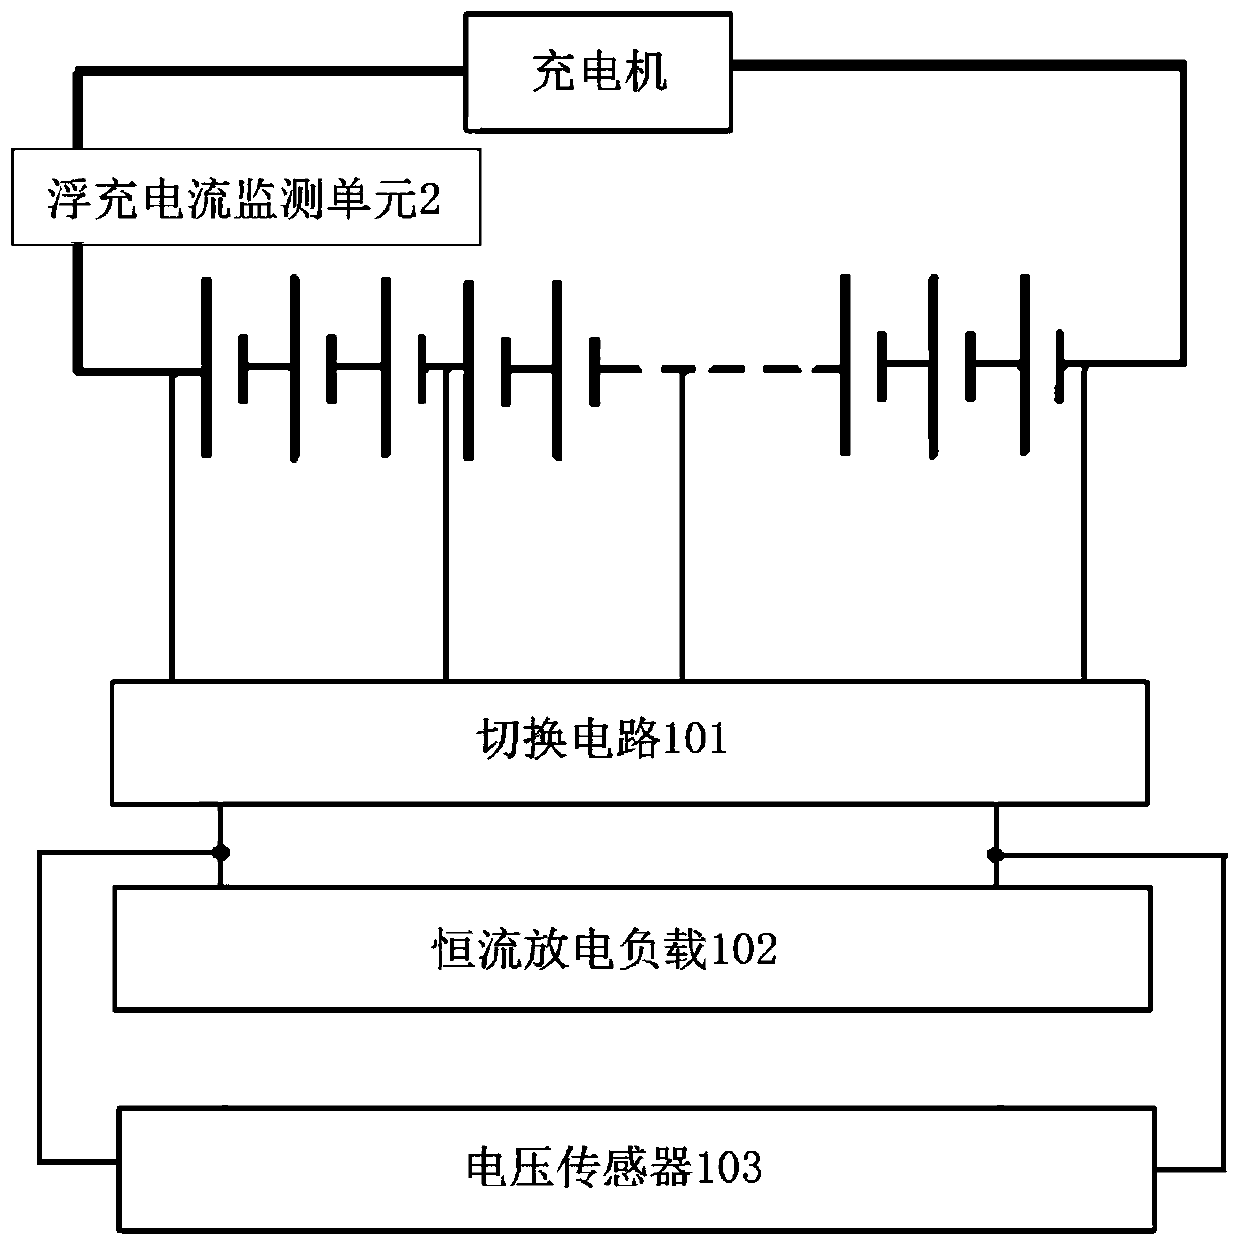 Multi-state online monitoring system for lead-acid storage battery